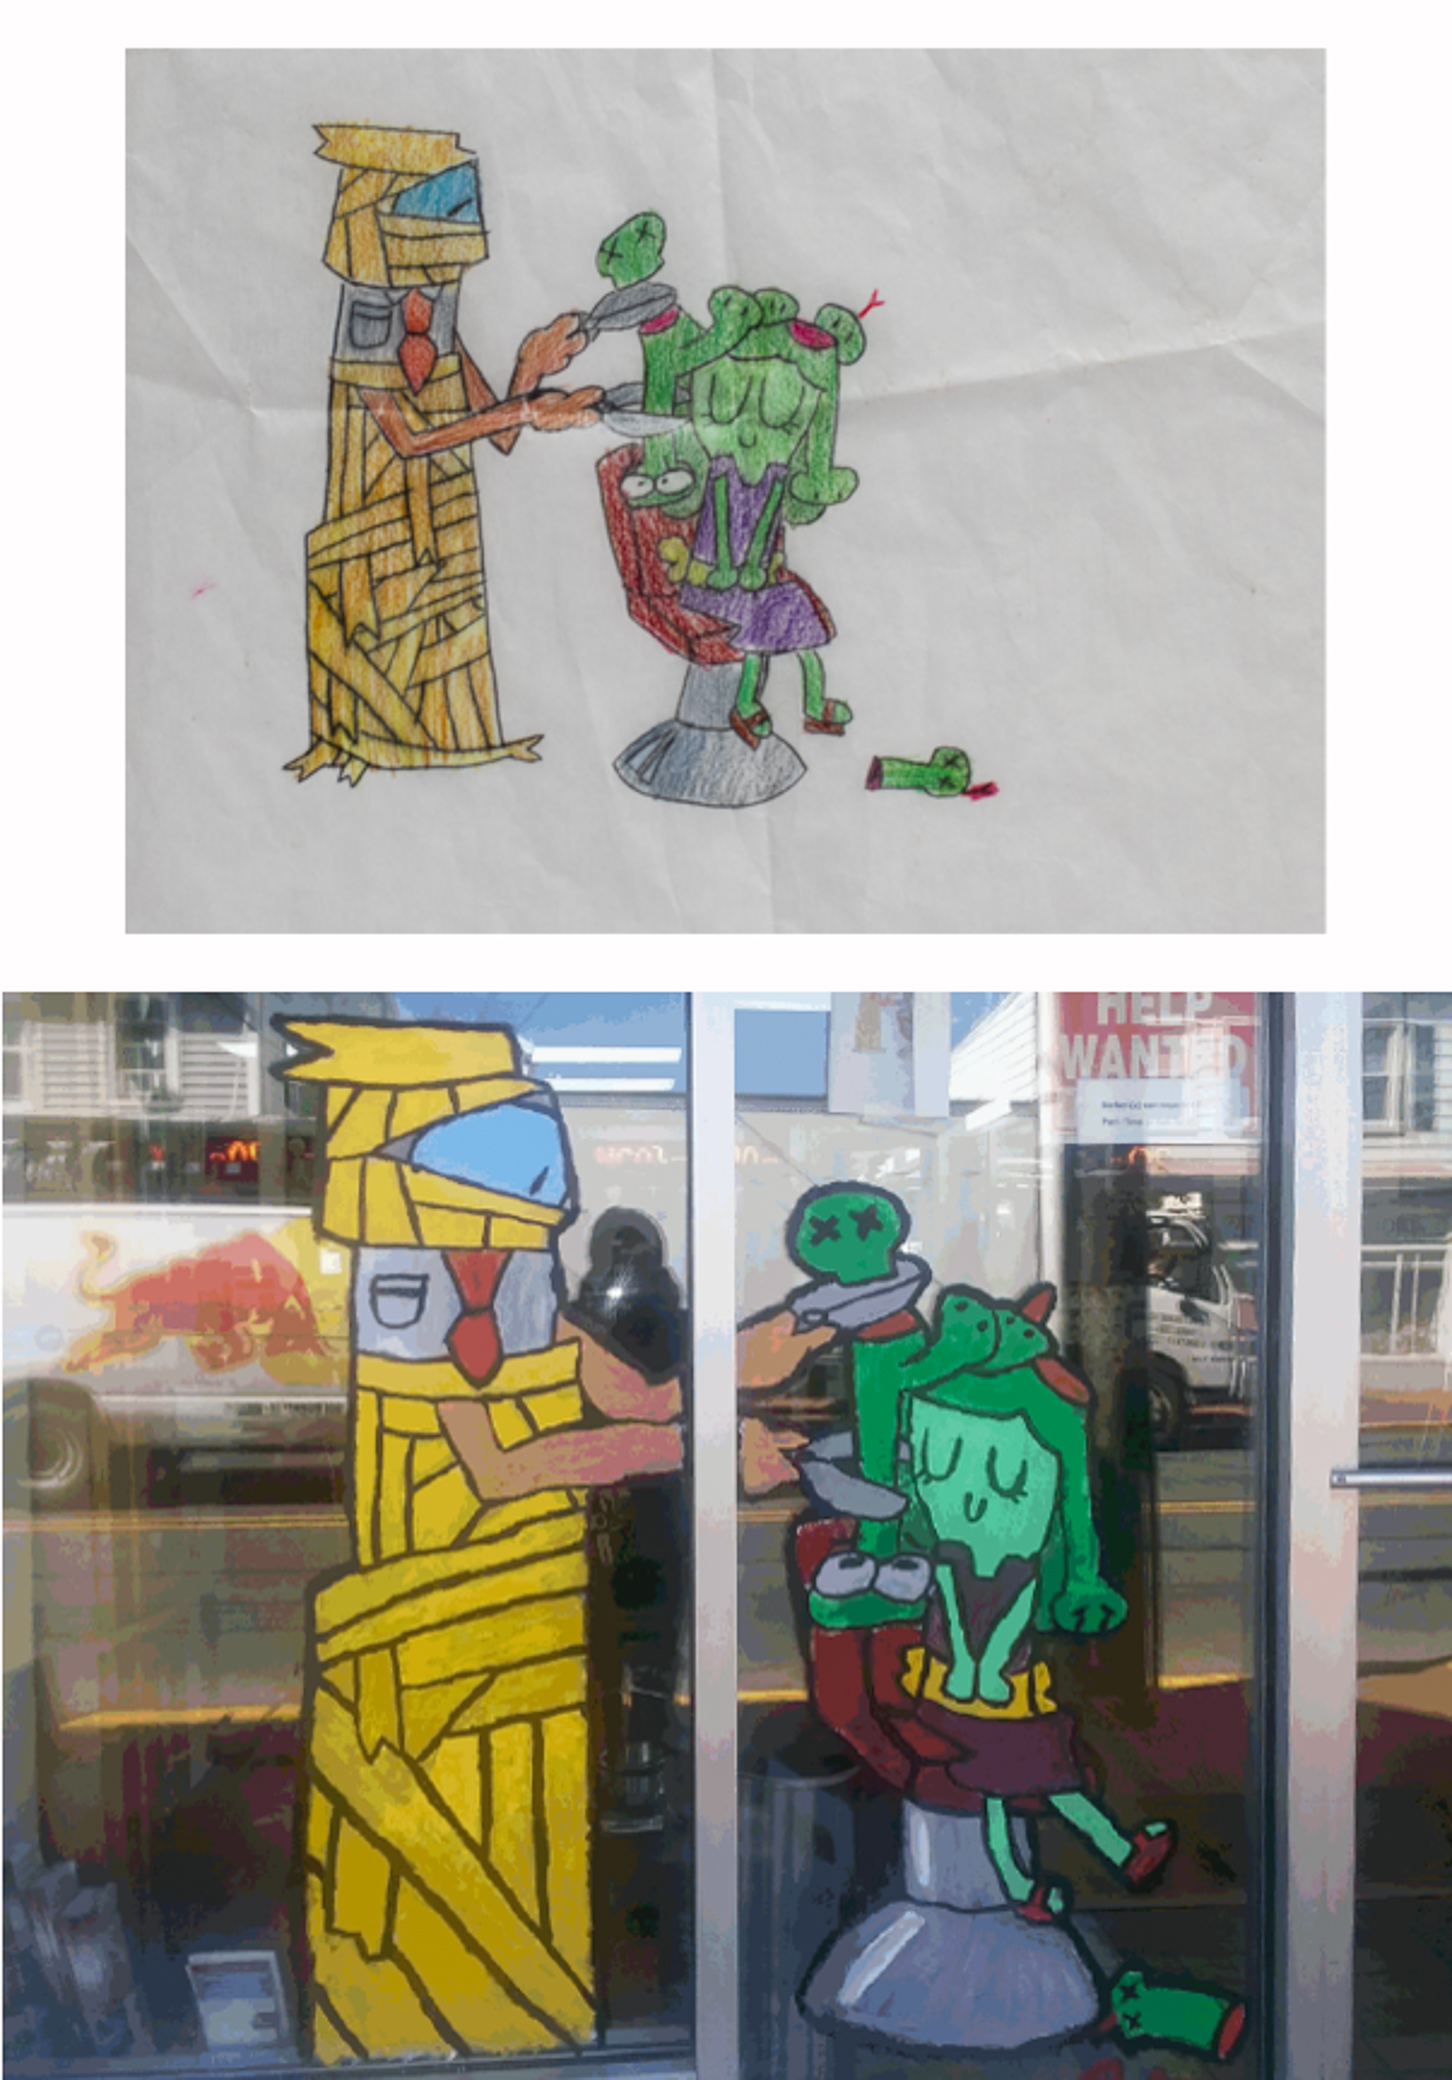 Melissa gets her snakes done window painting (top: concept sketch, bottom: completed painting)